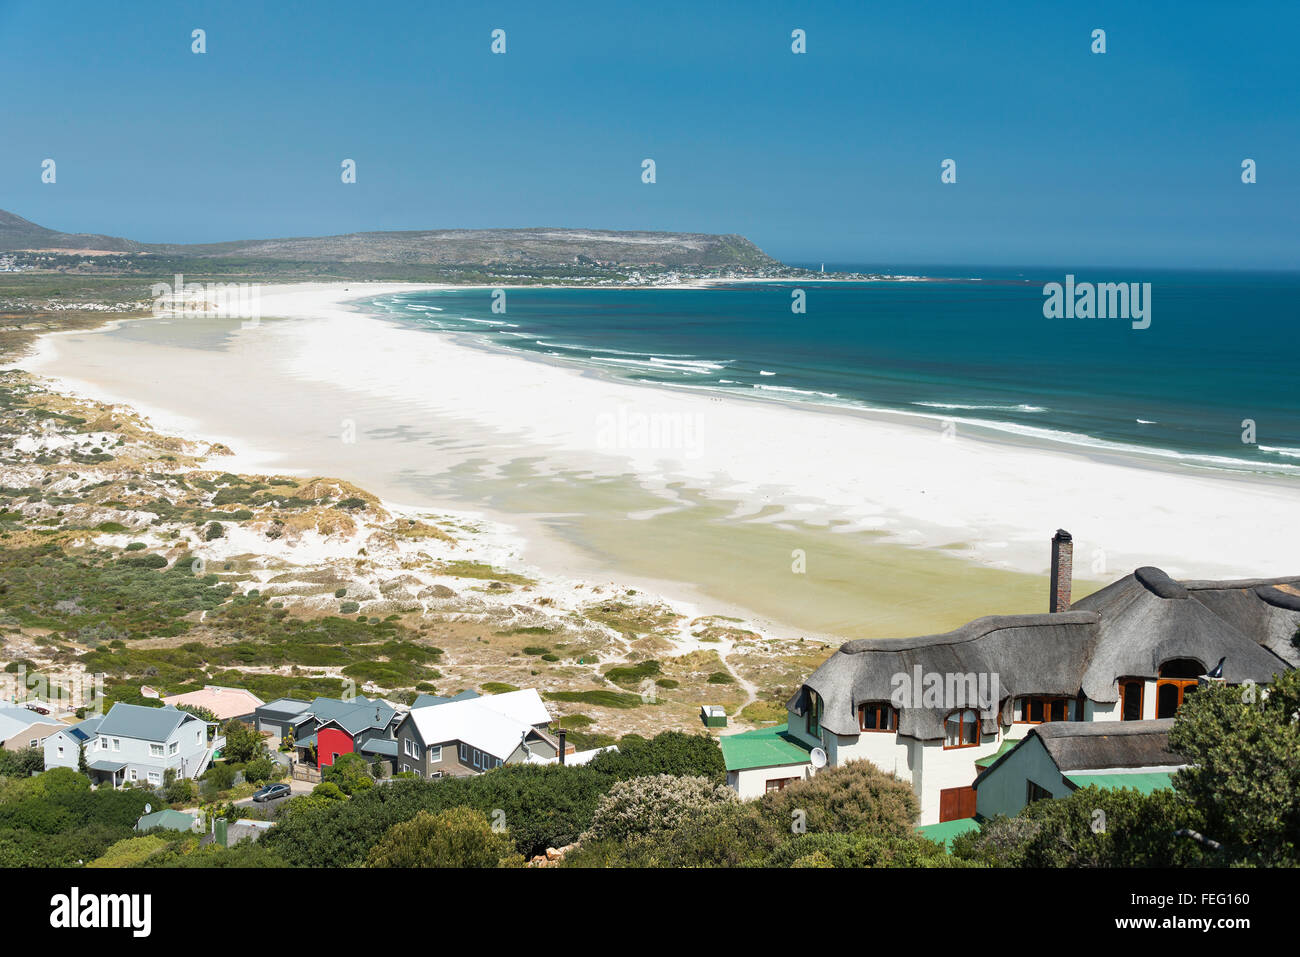 Noordhoek Beach, Kommetjie, Cape Peninsula, City of Cape Town Municipality, Western Cape Province, South Africa Stock Photo